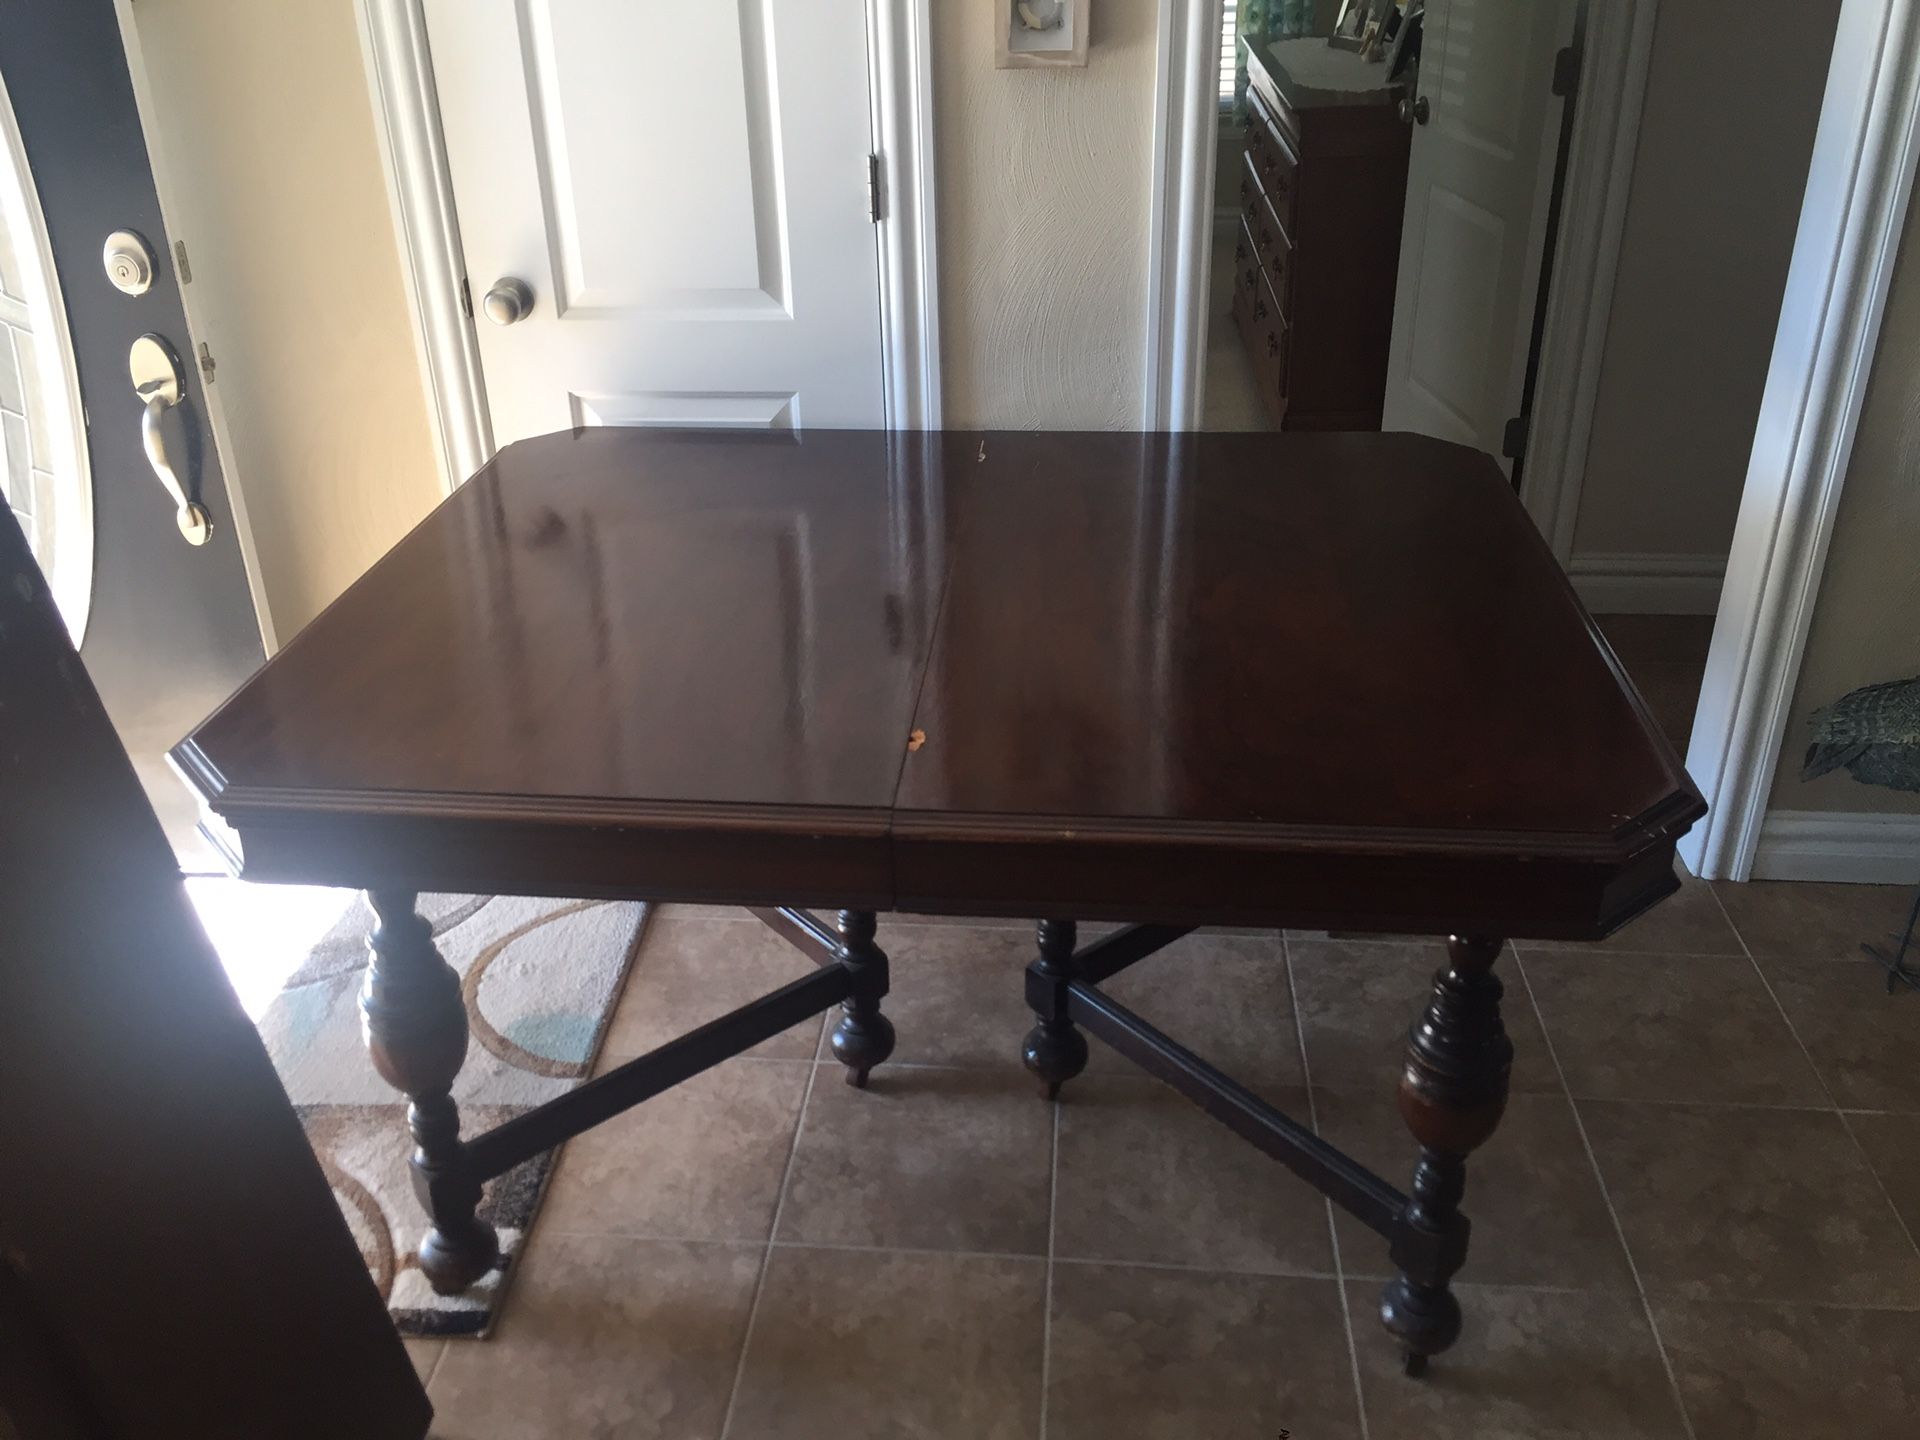 Antique dining table with 2 leafs and 5 chairs and 1 captains chair.